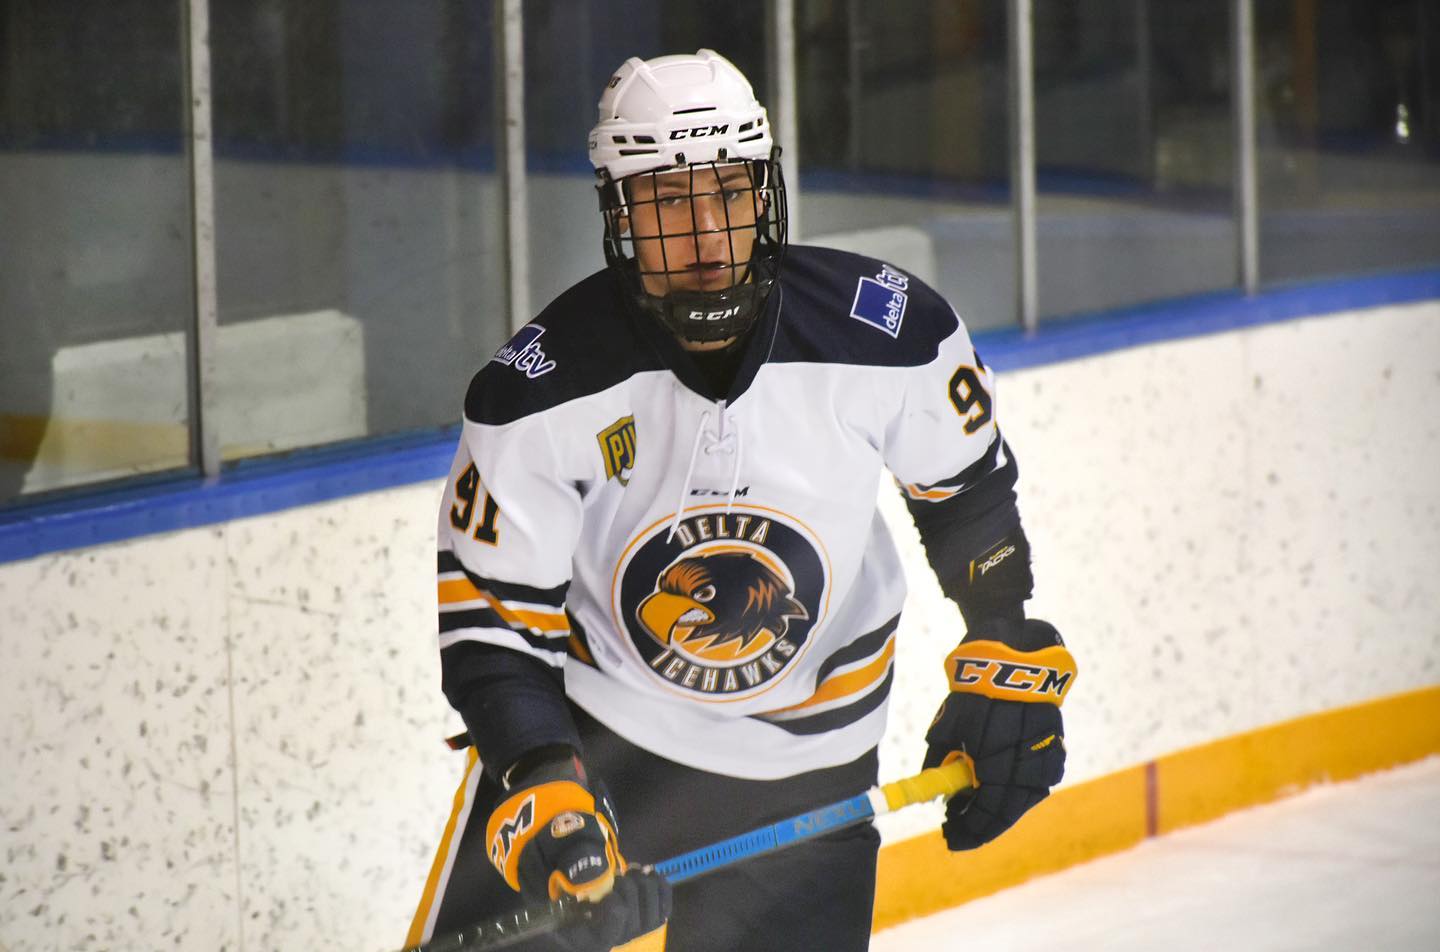 The Hawks have traded ‘02 F Nico Marini to the @chilliwackjetsofficial for future considerations. 

Thanks for your time in Delta, Nico! Best of luck in the valley! #DeltaHawkey